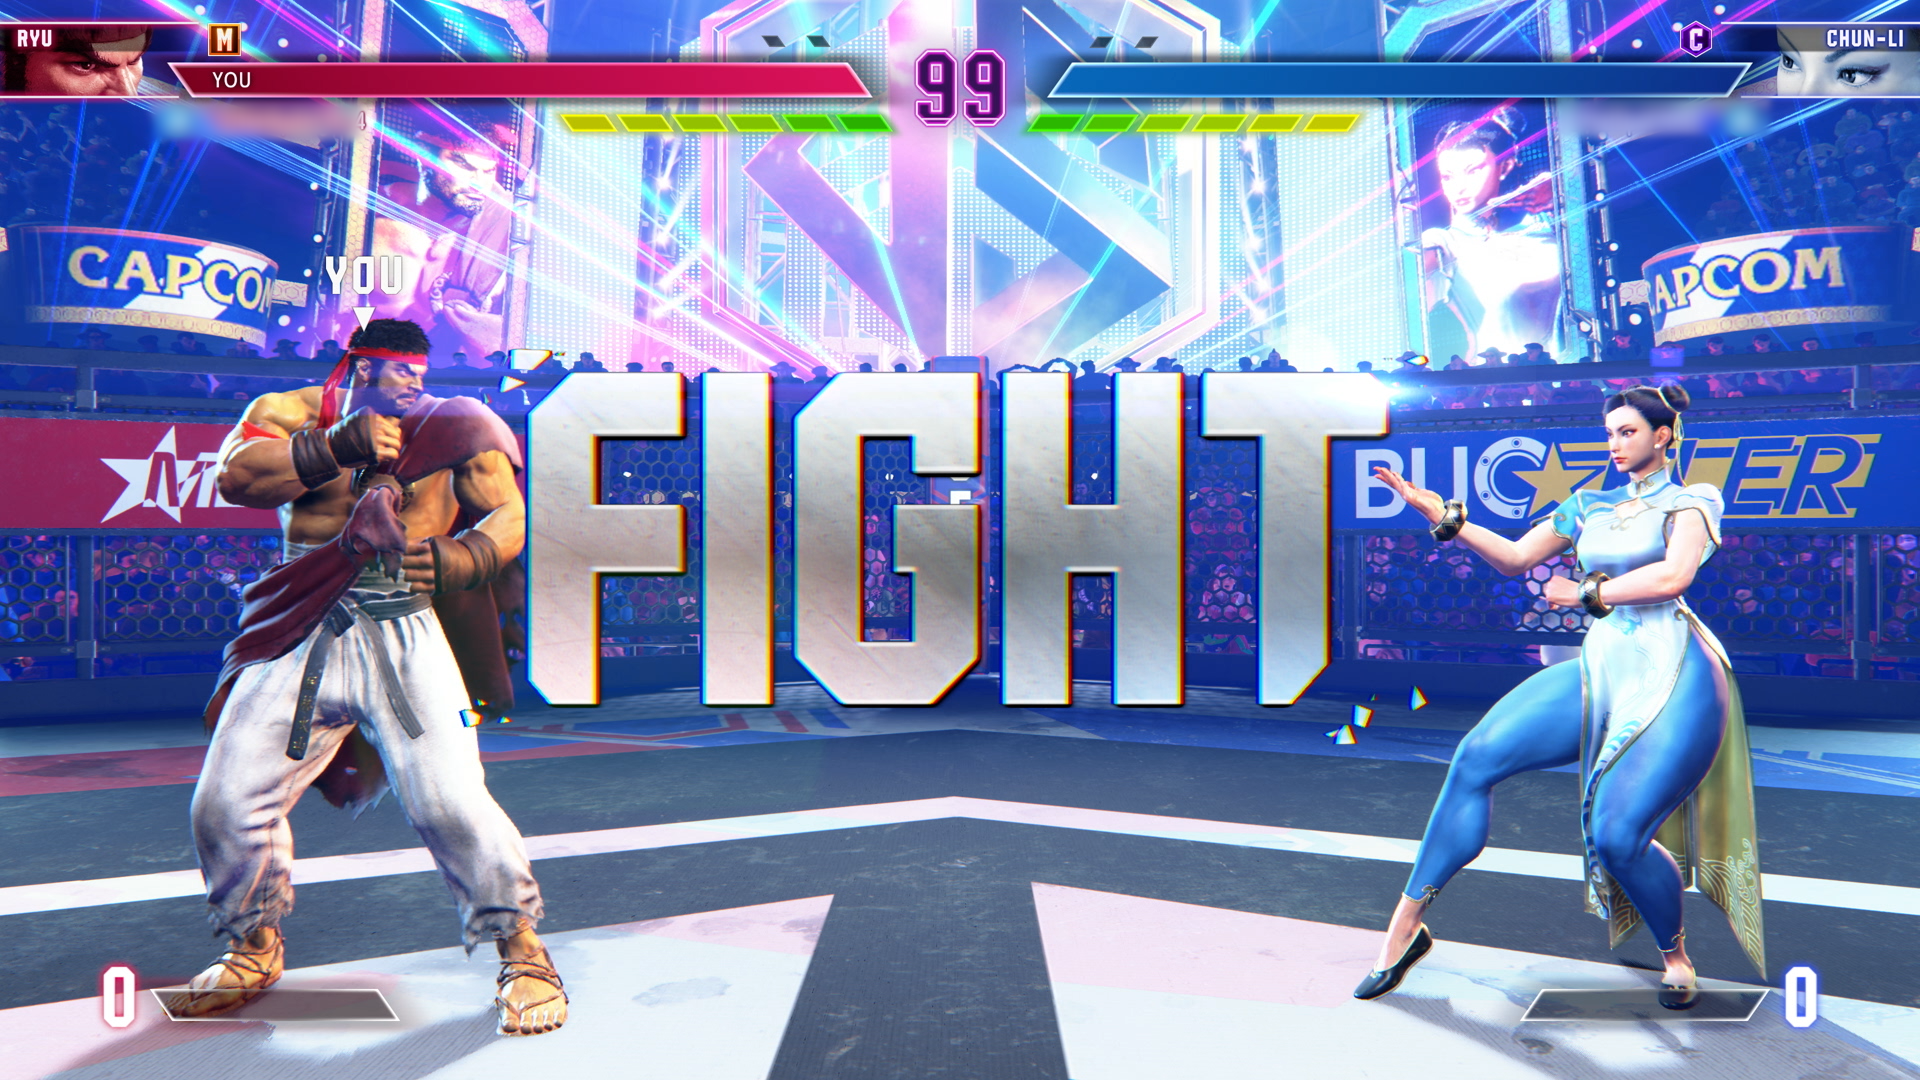 Video game screenshot showing two fighters facing off